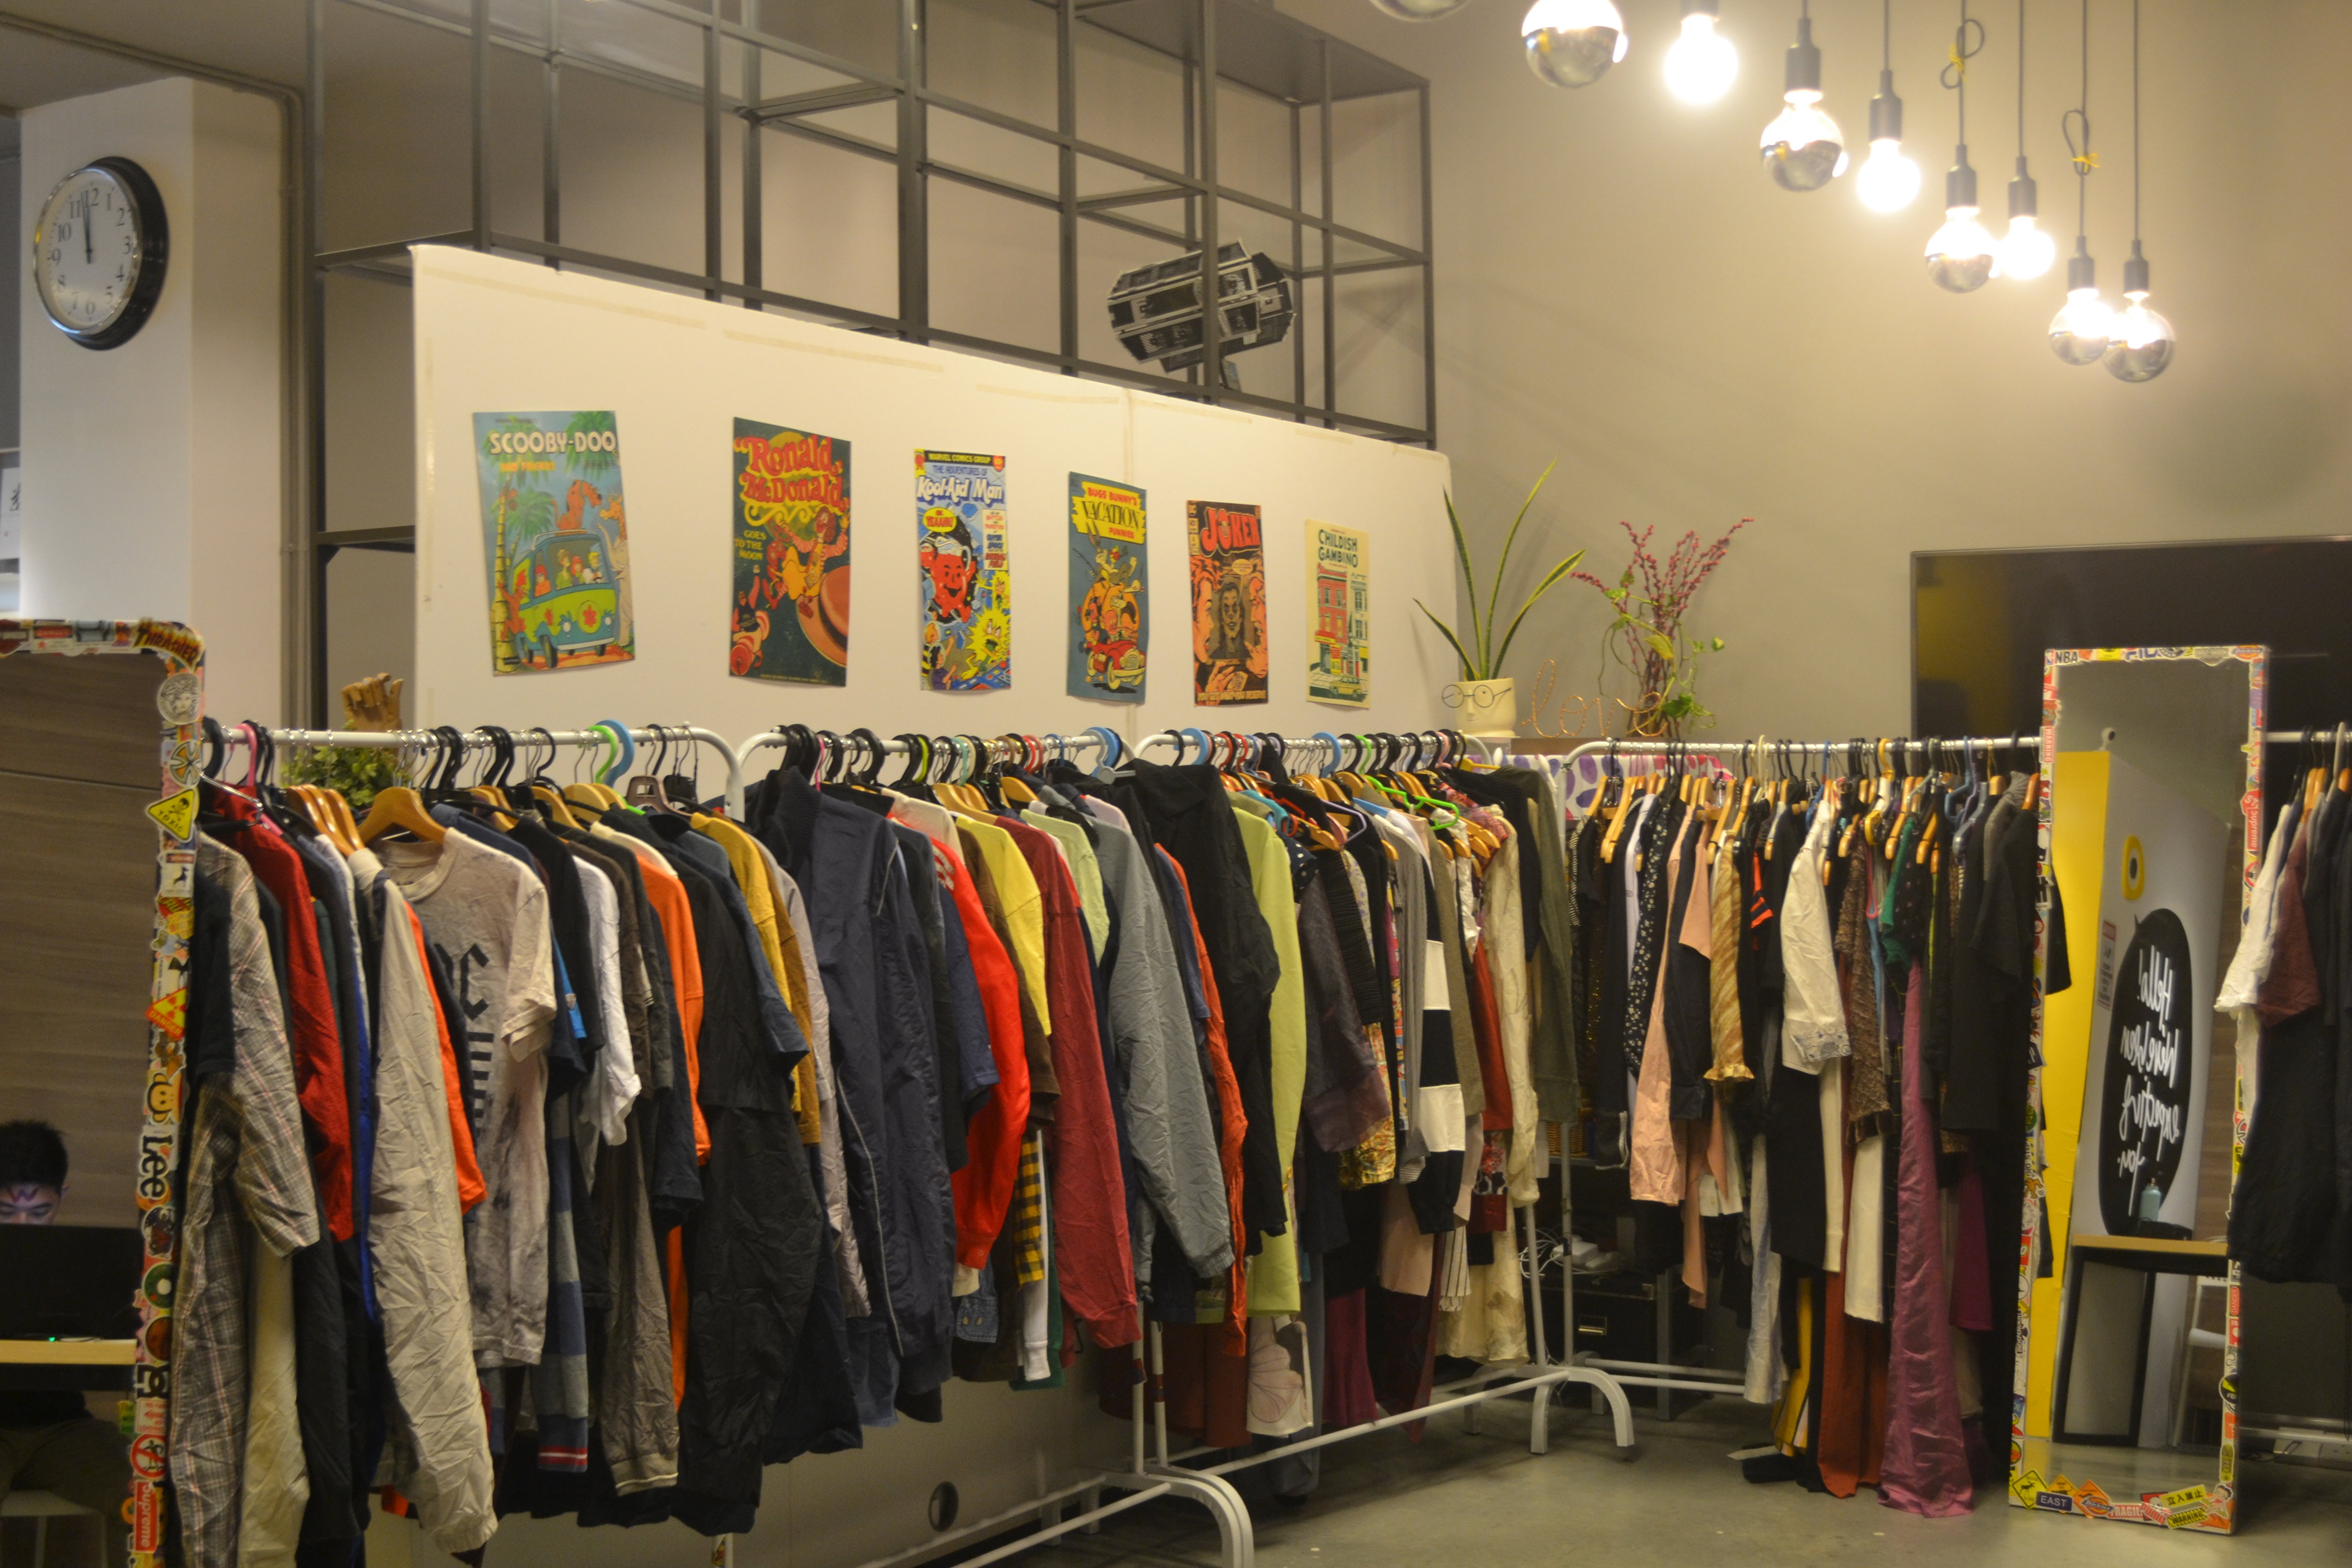 The range of apparel displayed can be seen as soon as one enters the store. 